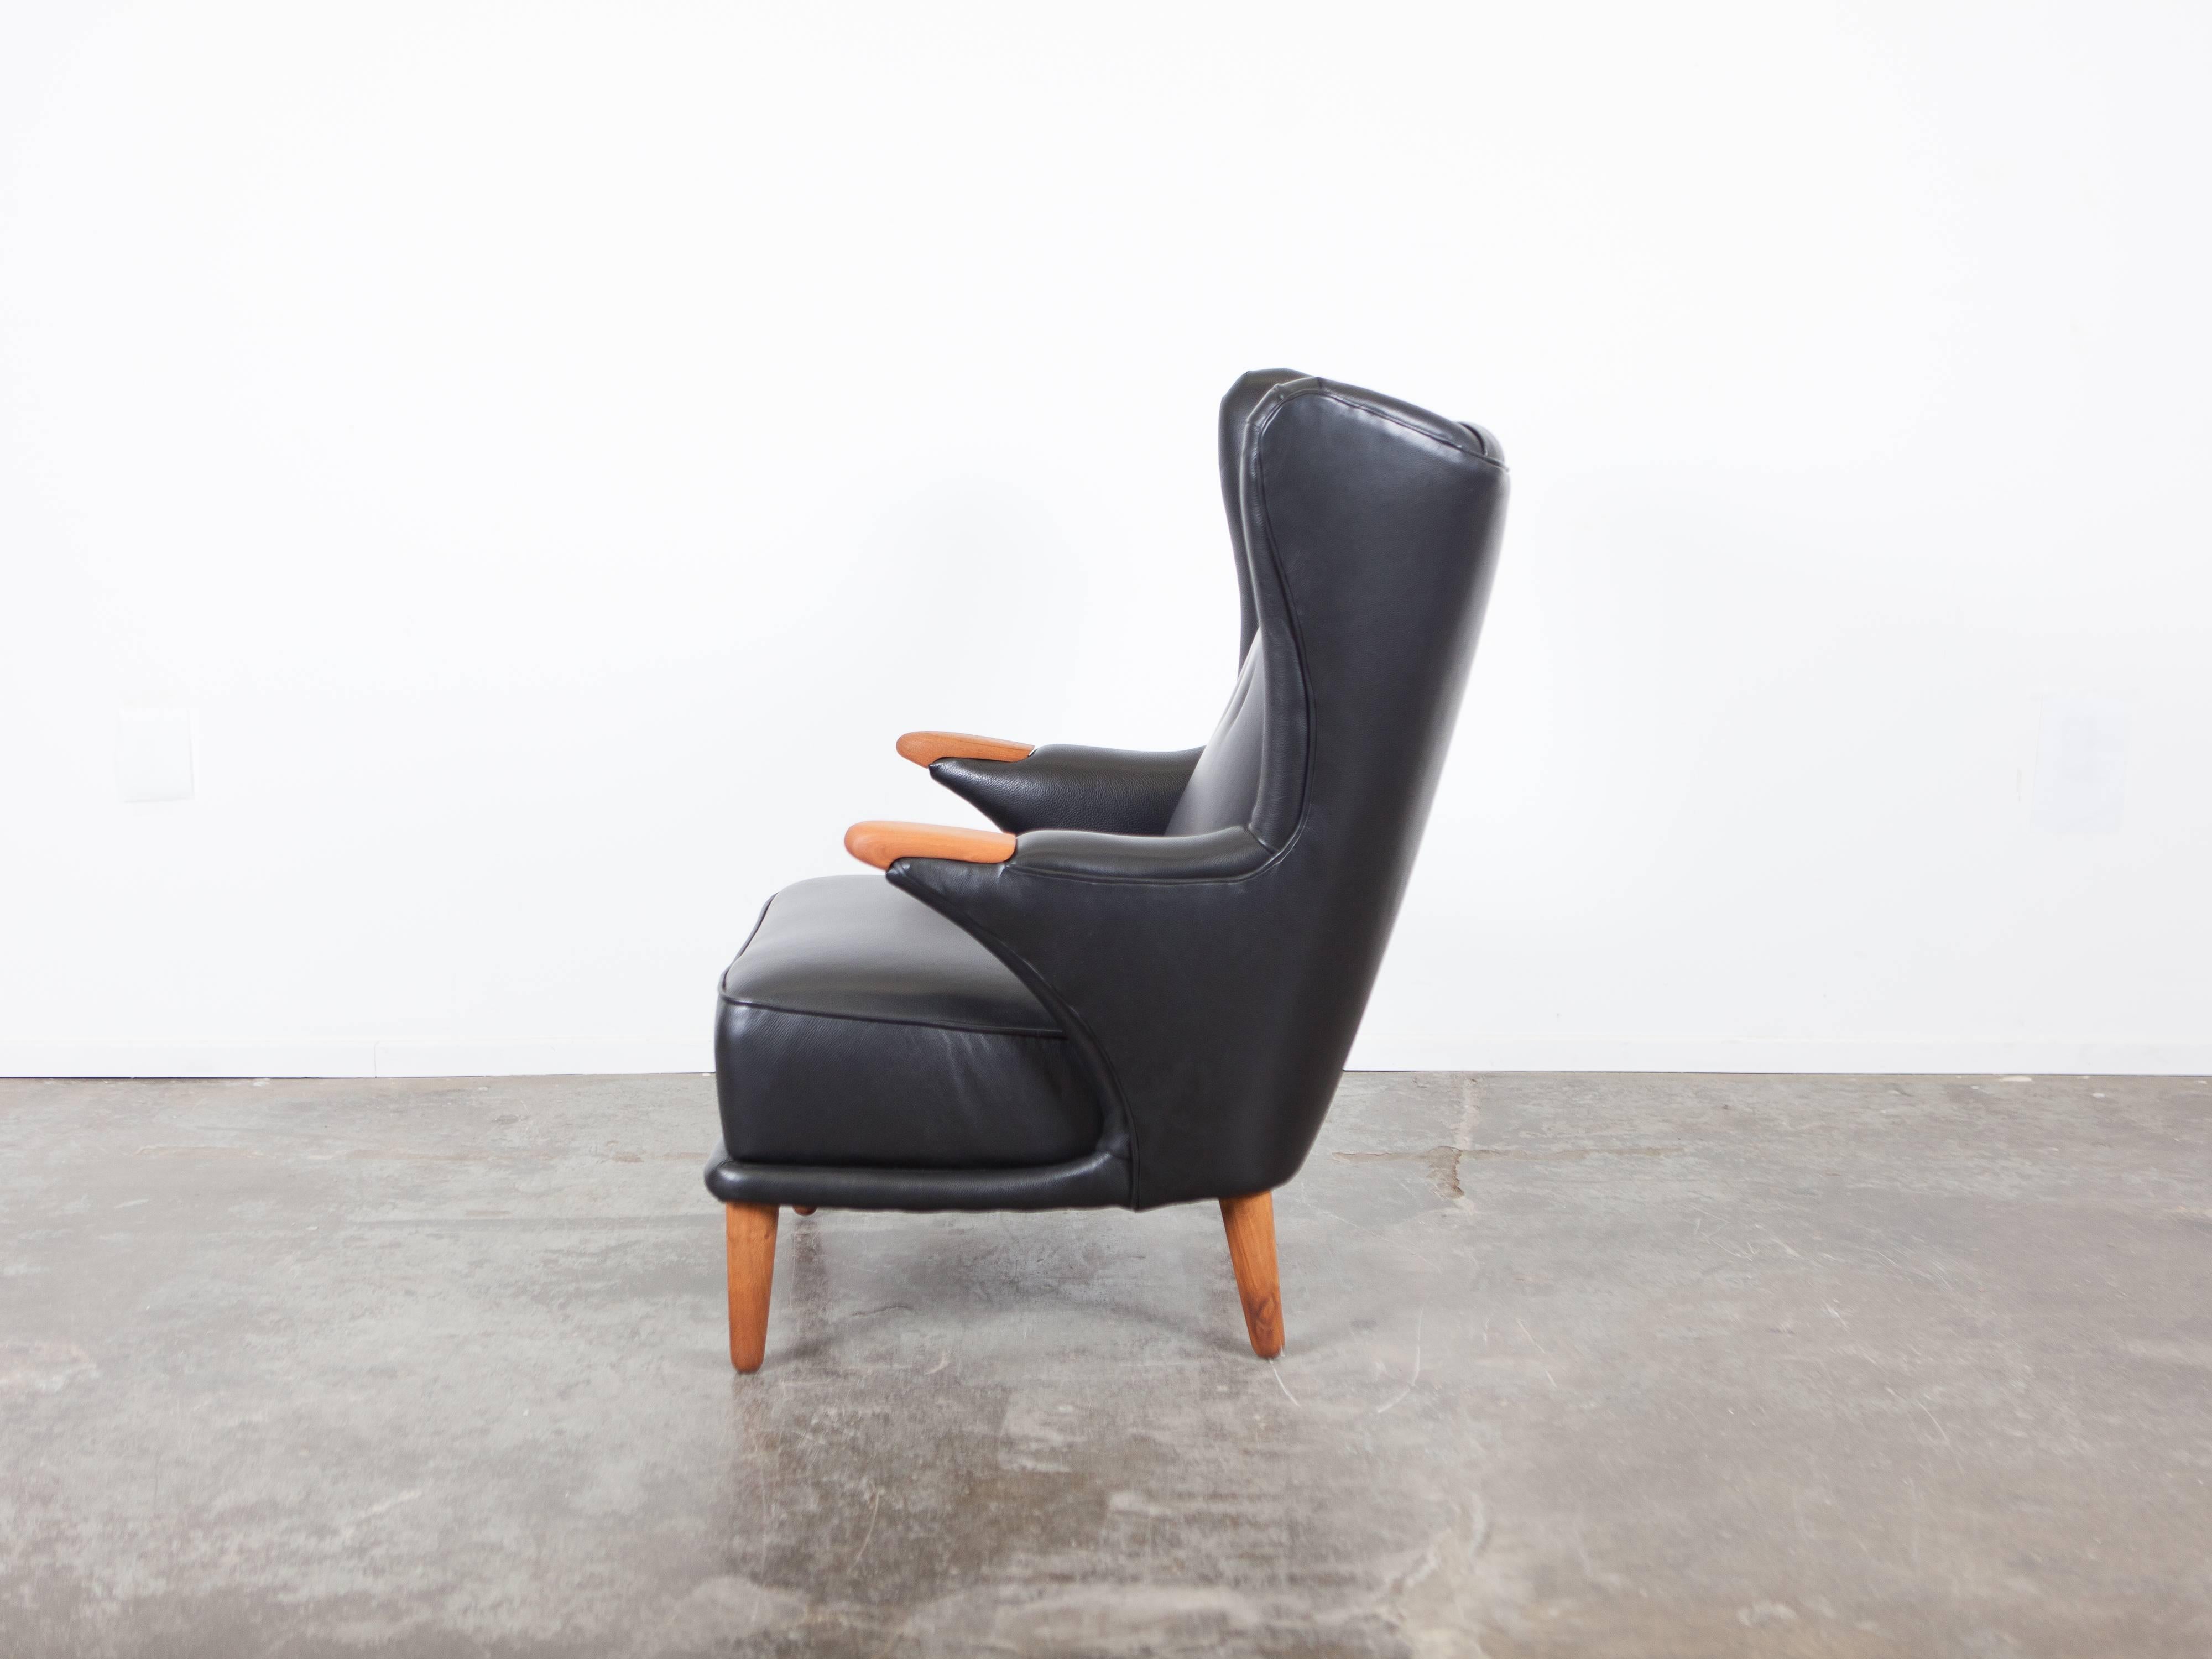 Danish Mid-Century Modern lounge chair, designed by Svend Skipper with oak arm inserts, newly upholstered in black leather with tufted back.